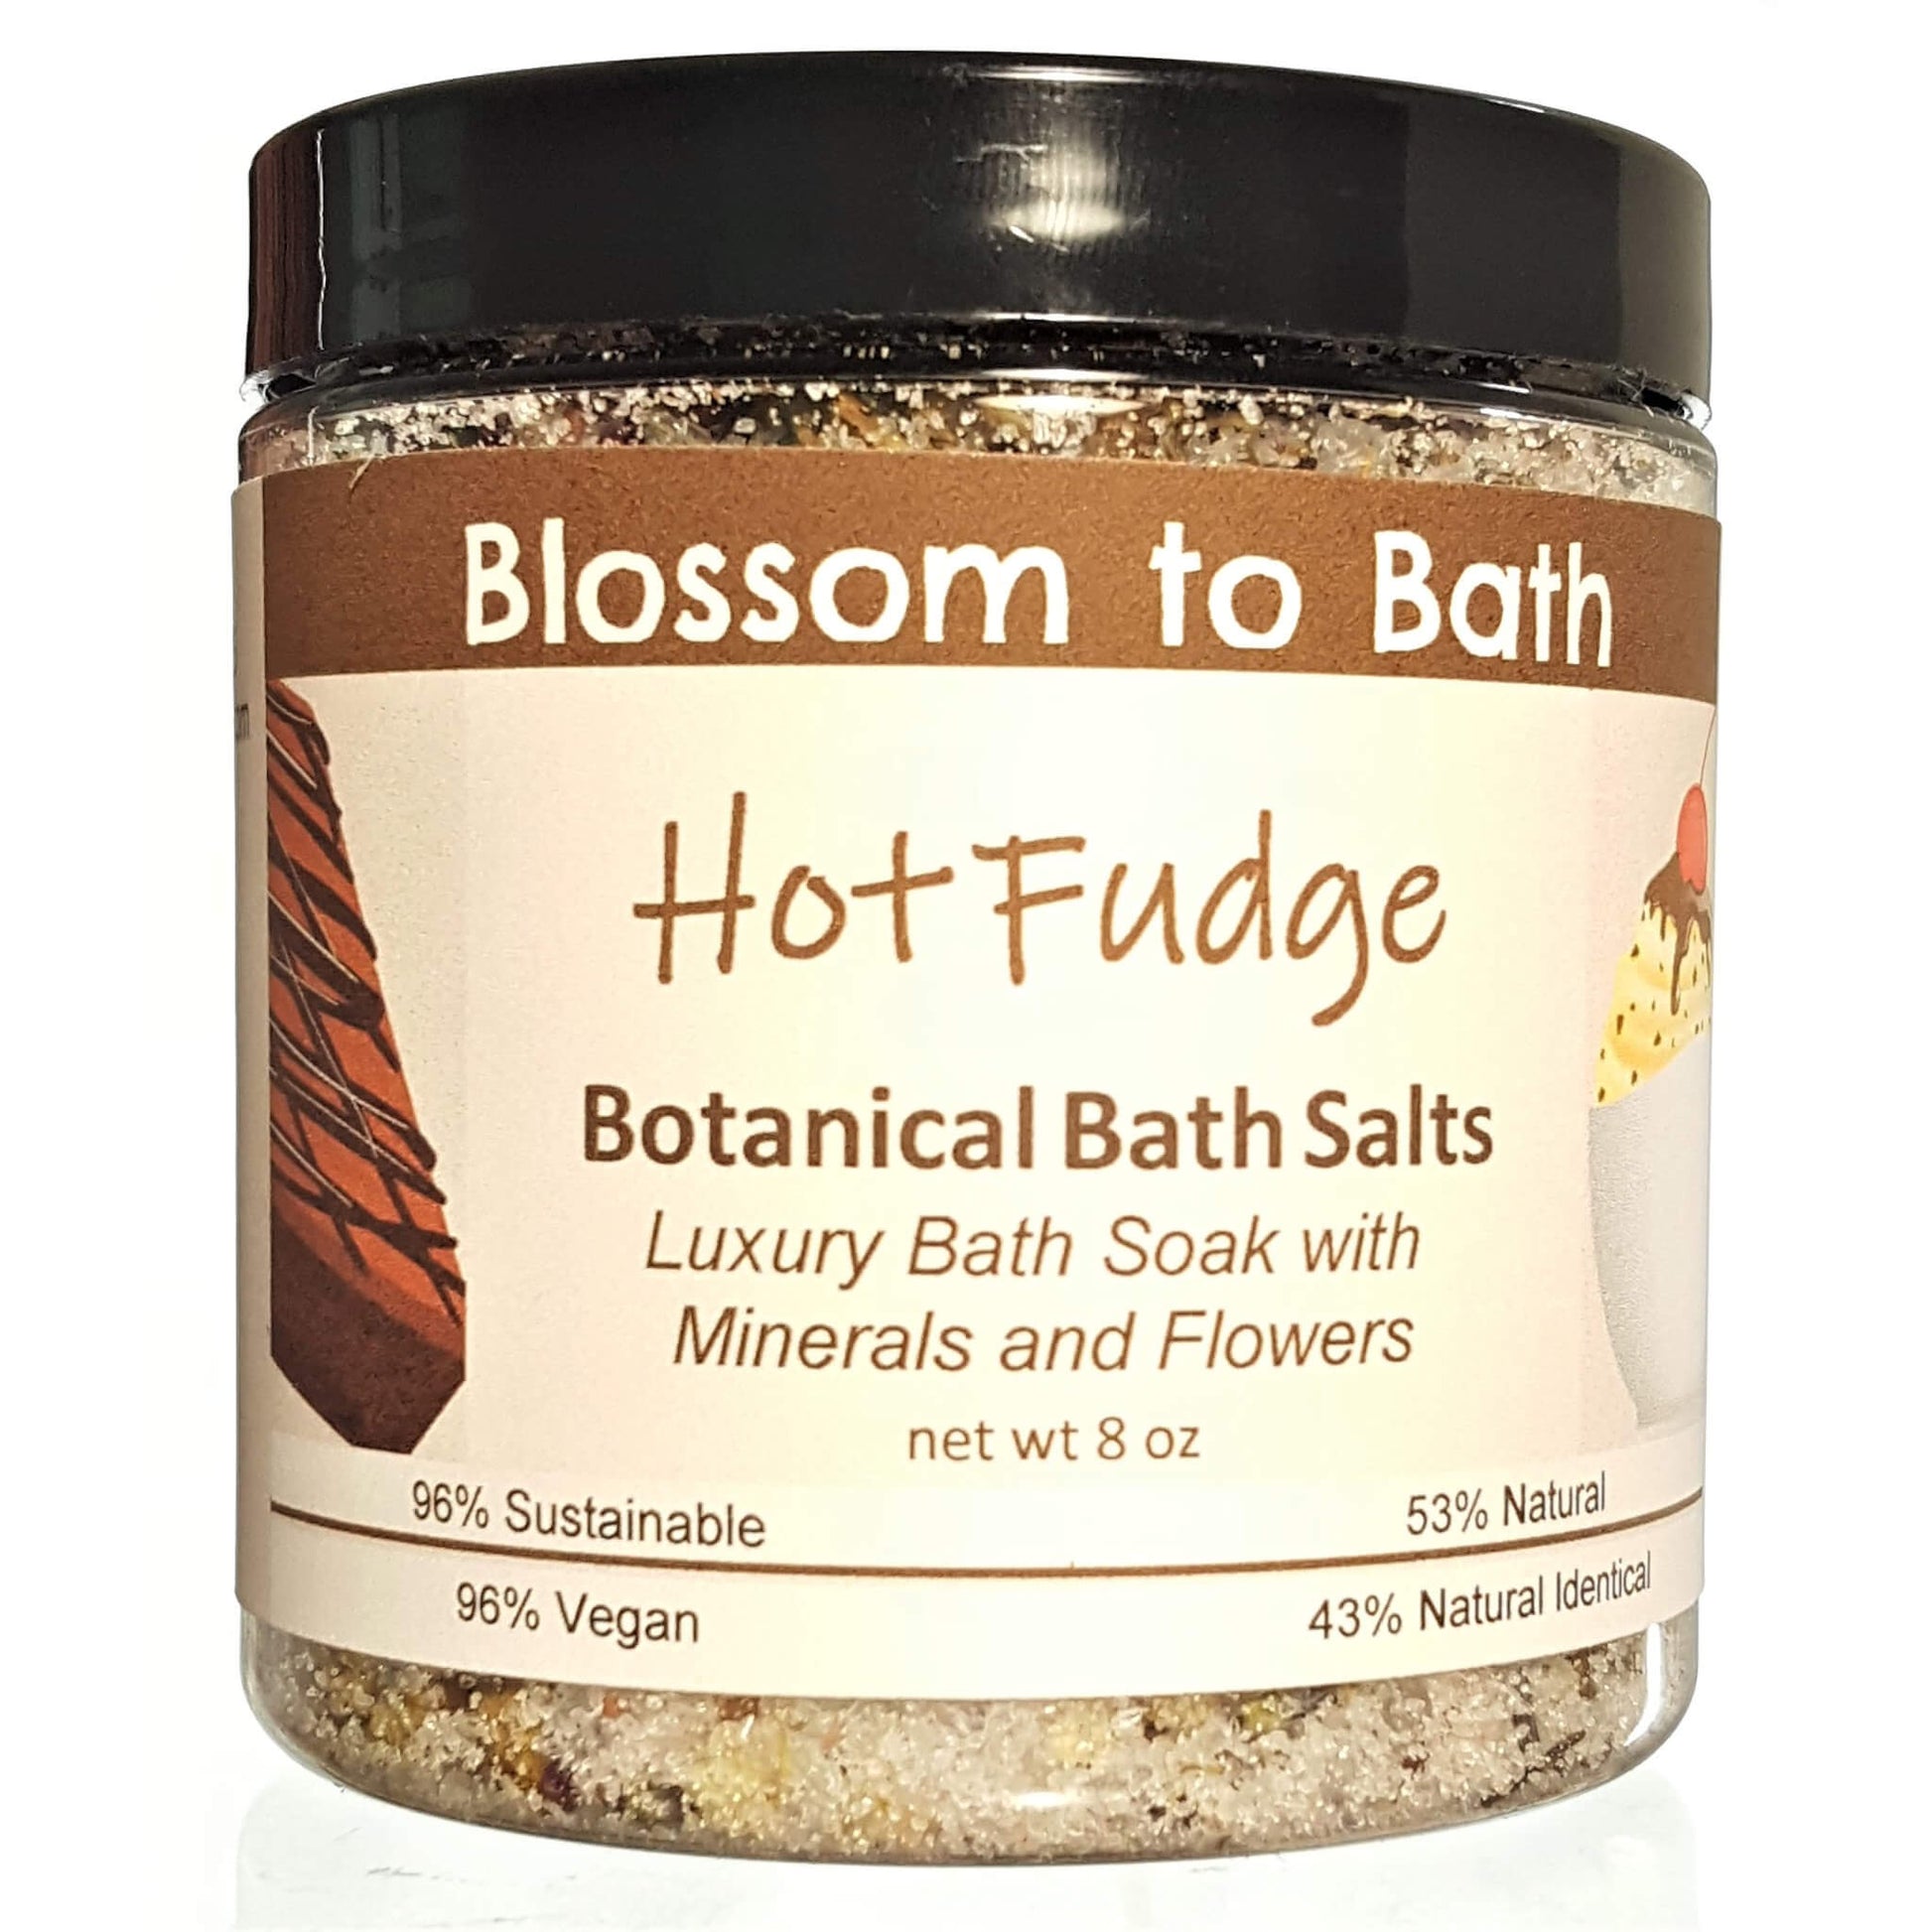 Buy Blossom to Bath Hot Fudge Botanical Bath Salts from Flowersong Soap Studio.  A hand selected variety of skin loving botanicals and mineral rich salts for a unique, luxurious soaking experience  The fragrance is three layers deep in rich chocolate.